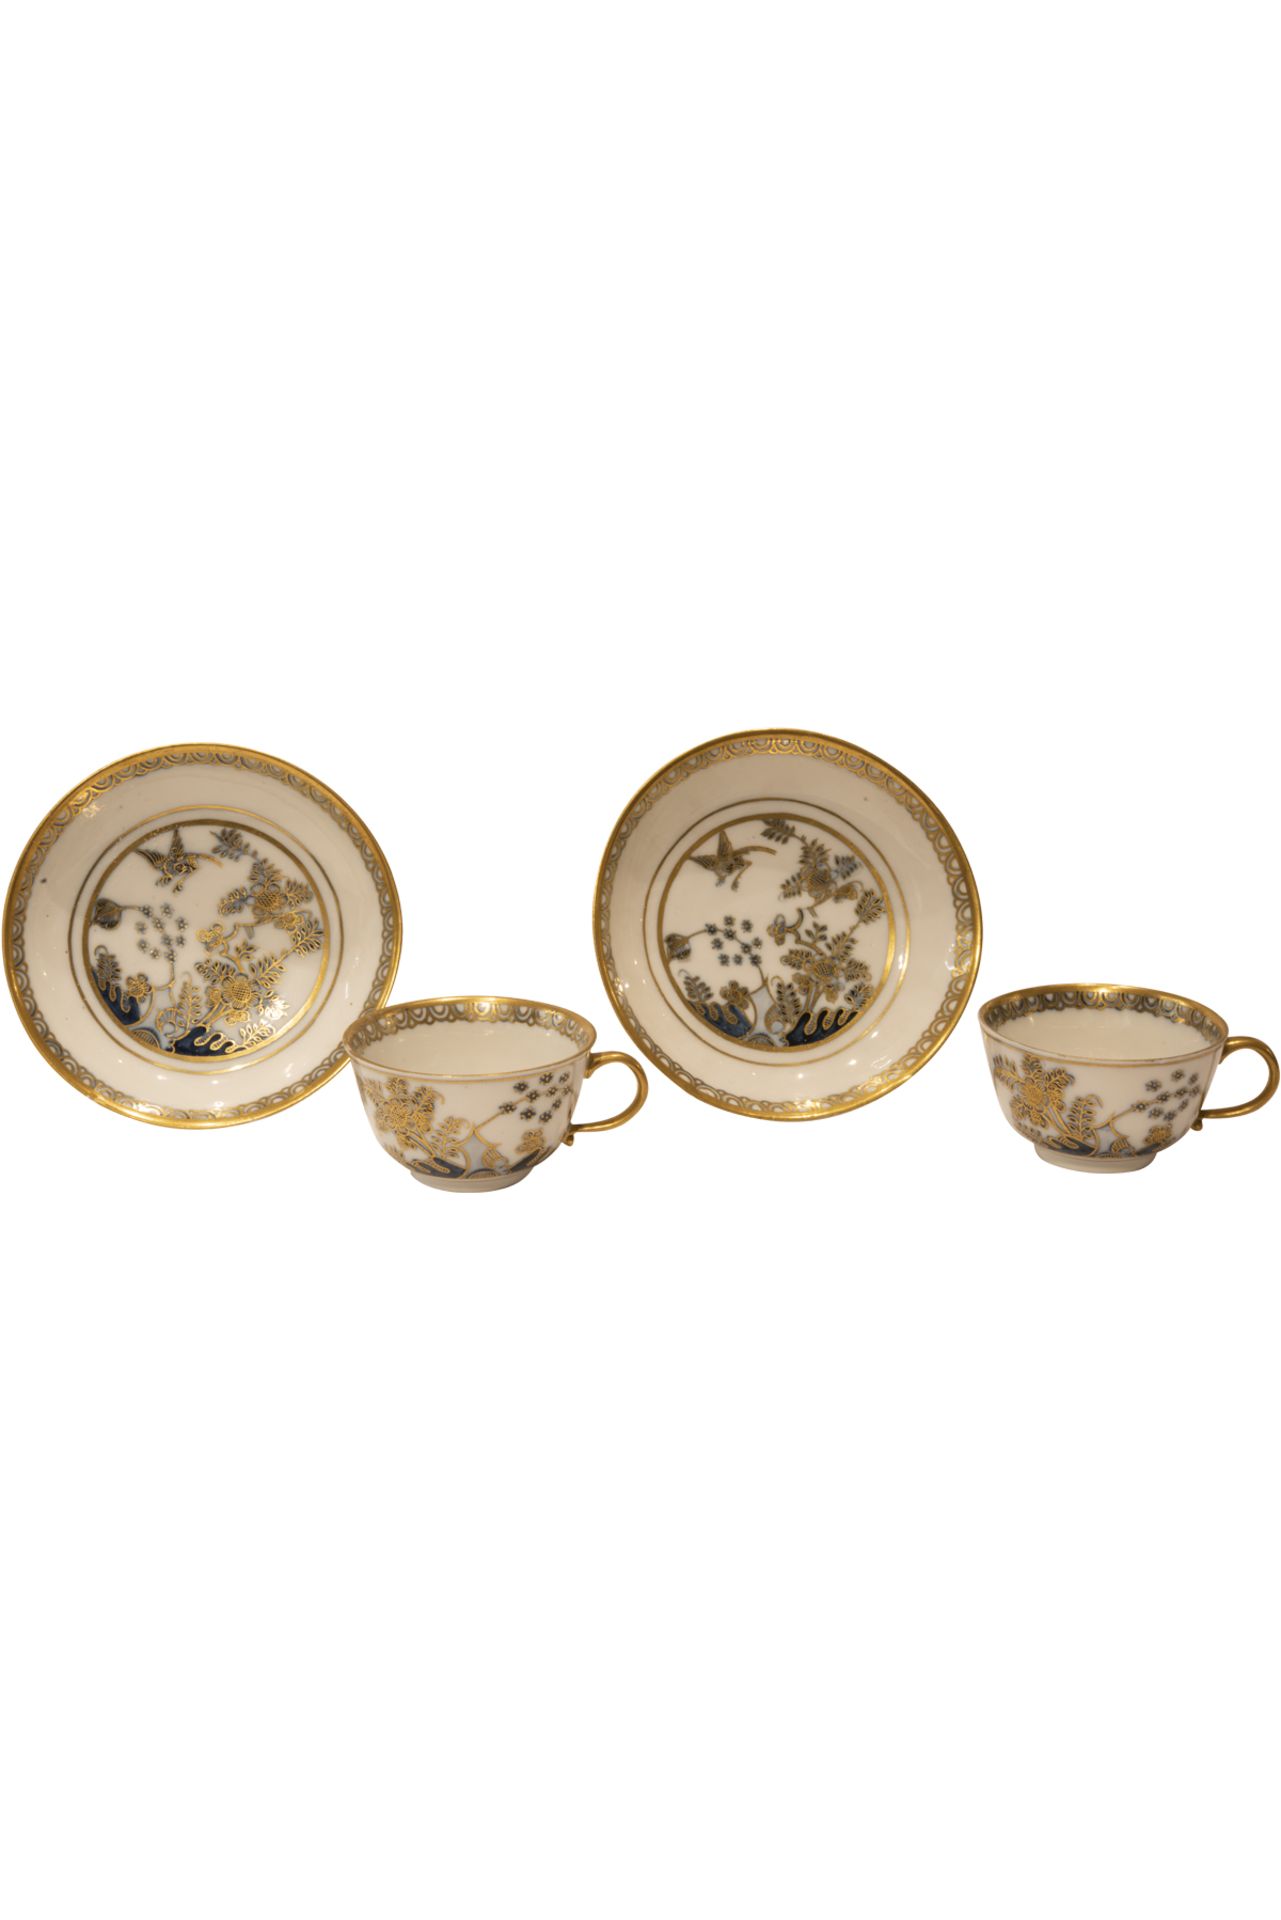 Two Cups with saucers, Meissen around 1740 - Image 2 of 6